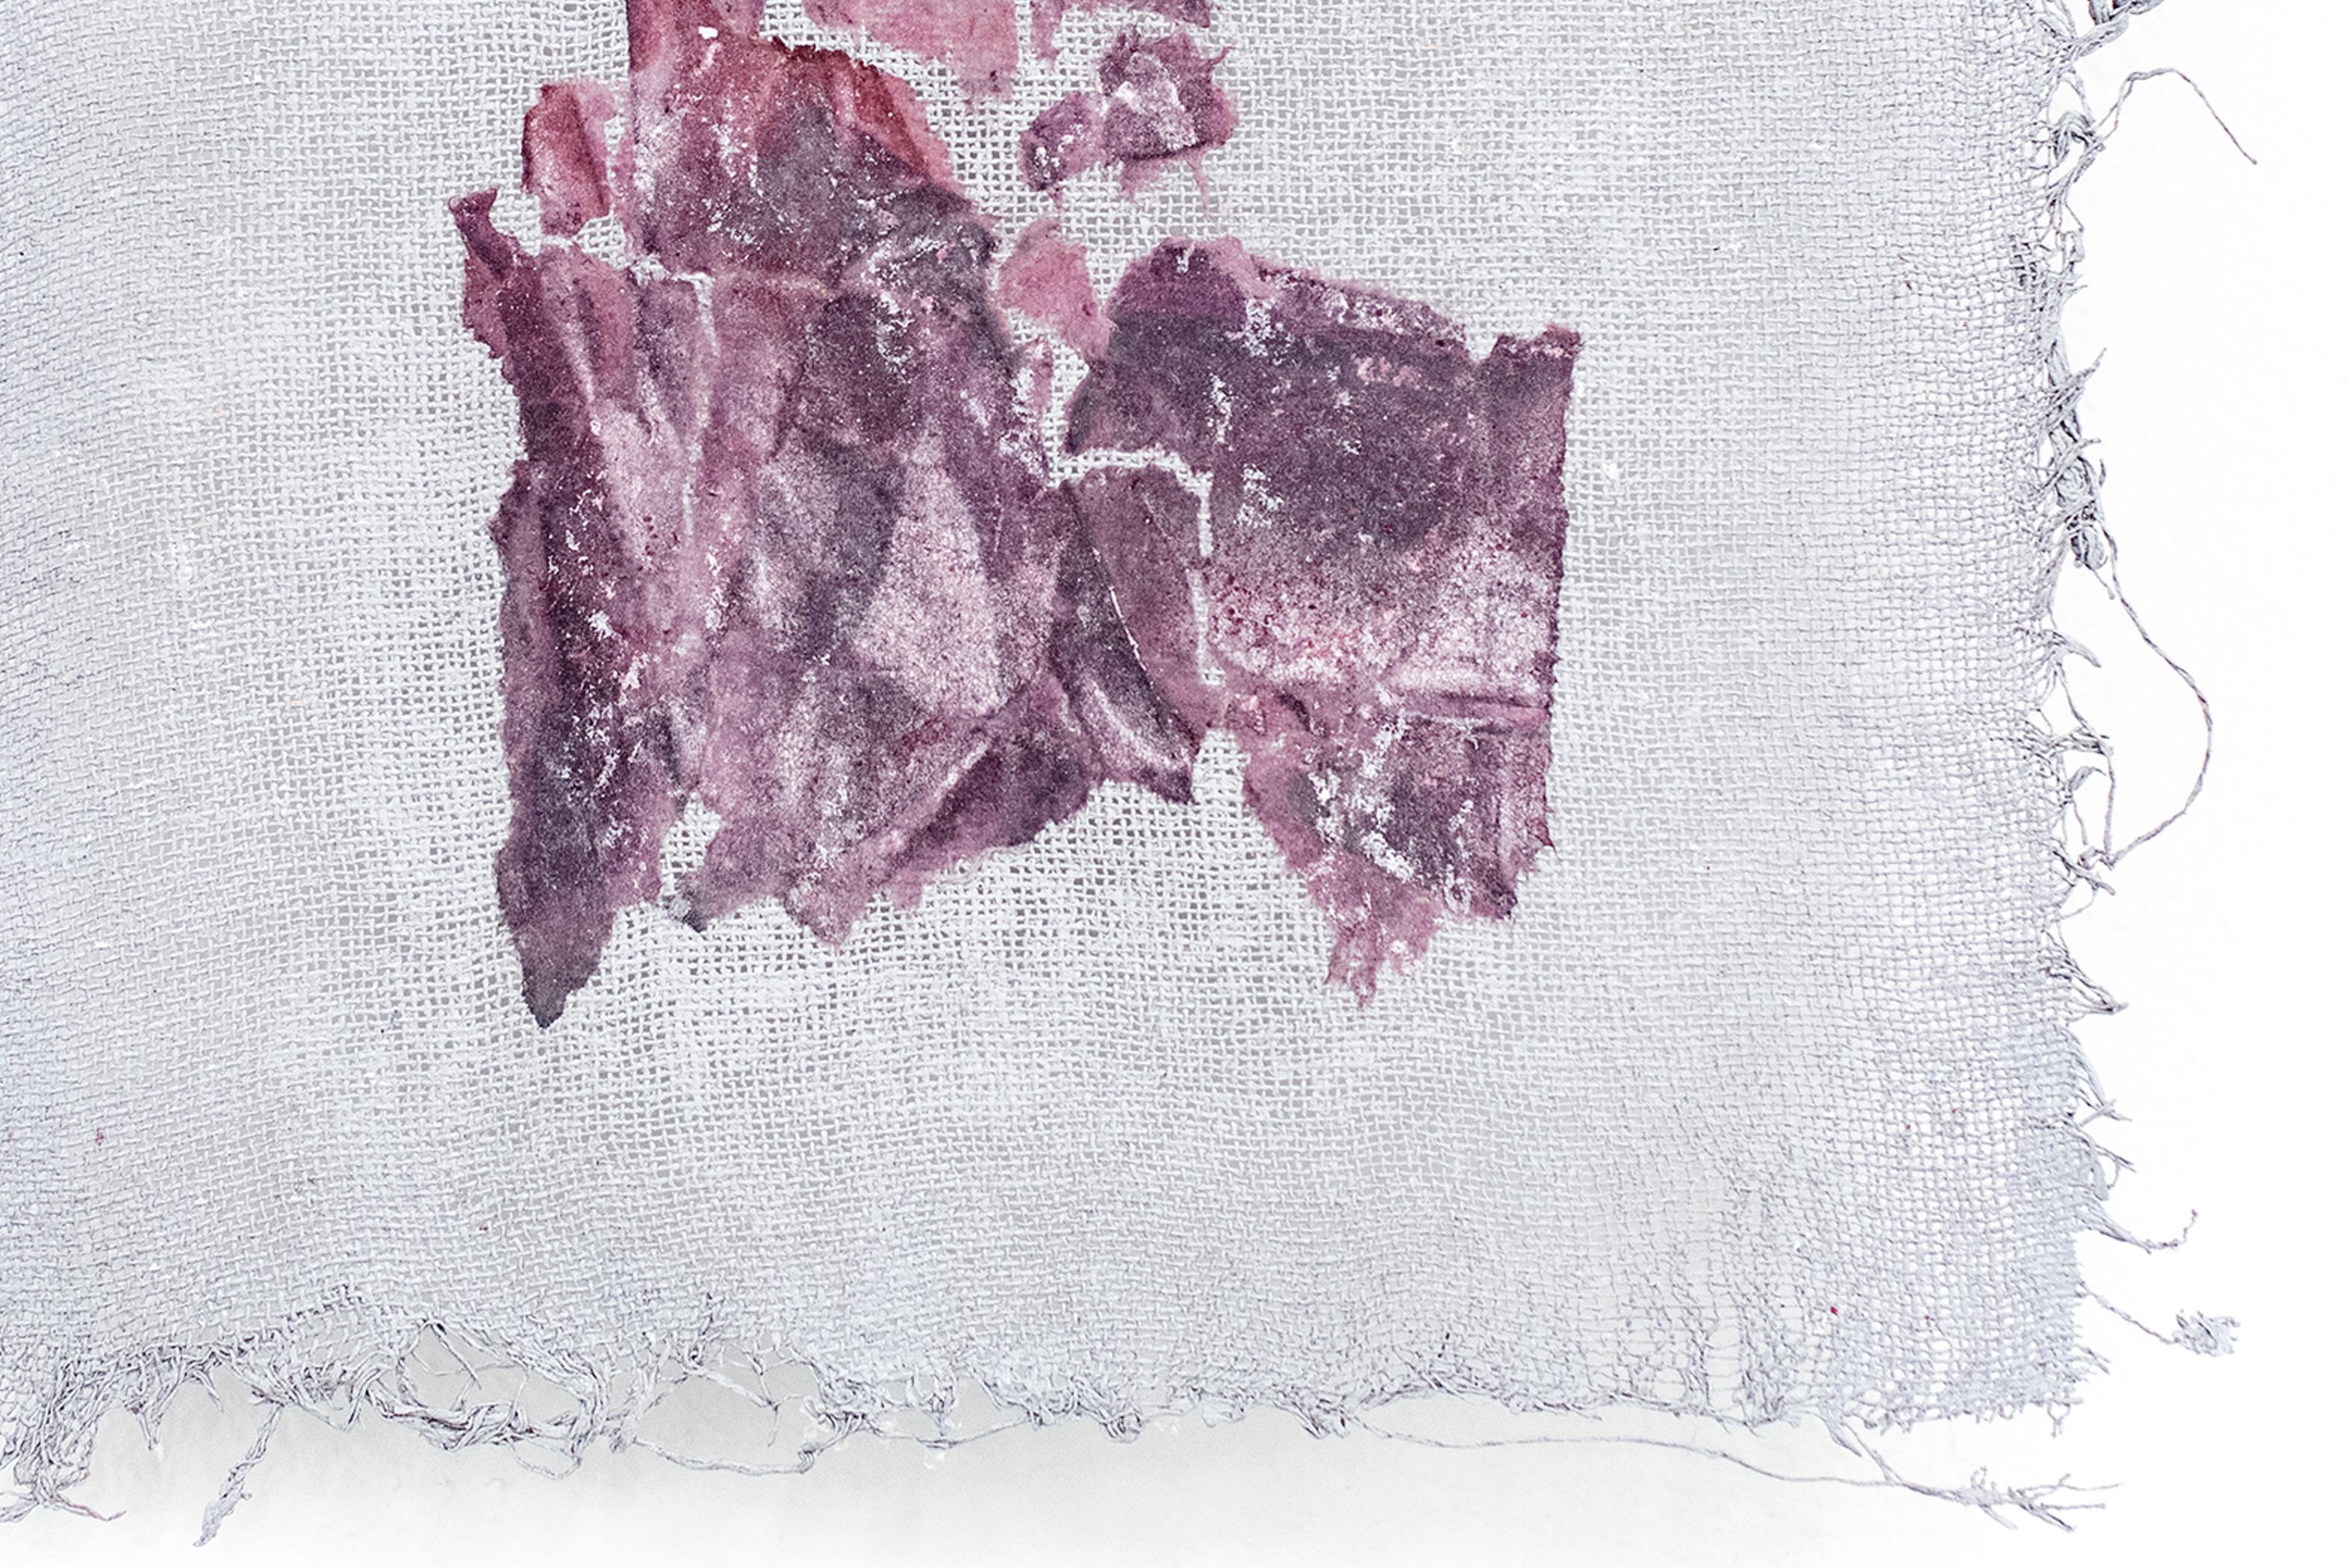 Tooth, Mulberry paper and acrylic on gauze 2